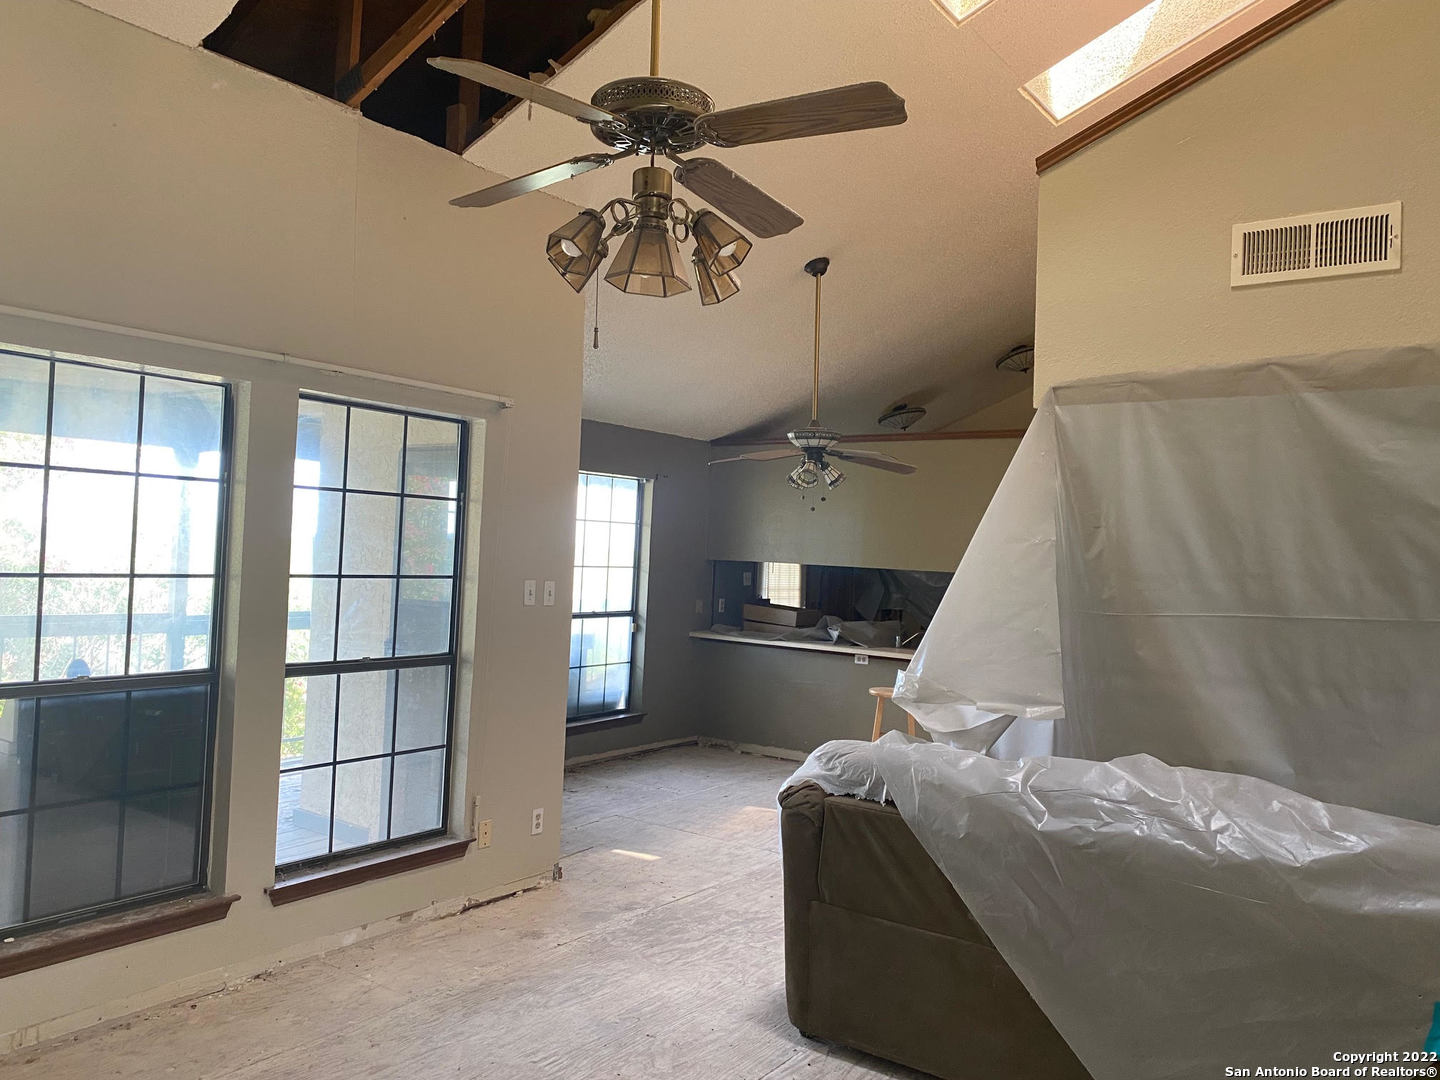 Investment potential condo with 2 bedrooms and 2 bathrooms. High ceilings in the living room along with skylights have great potential. Cash offers only. No repairs will be made. Needs TLC.